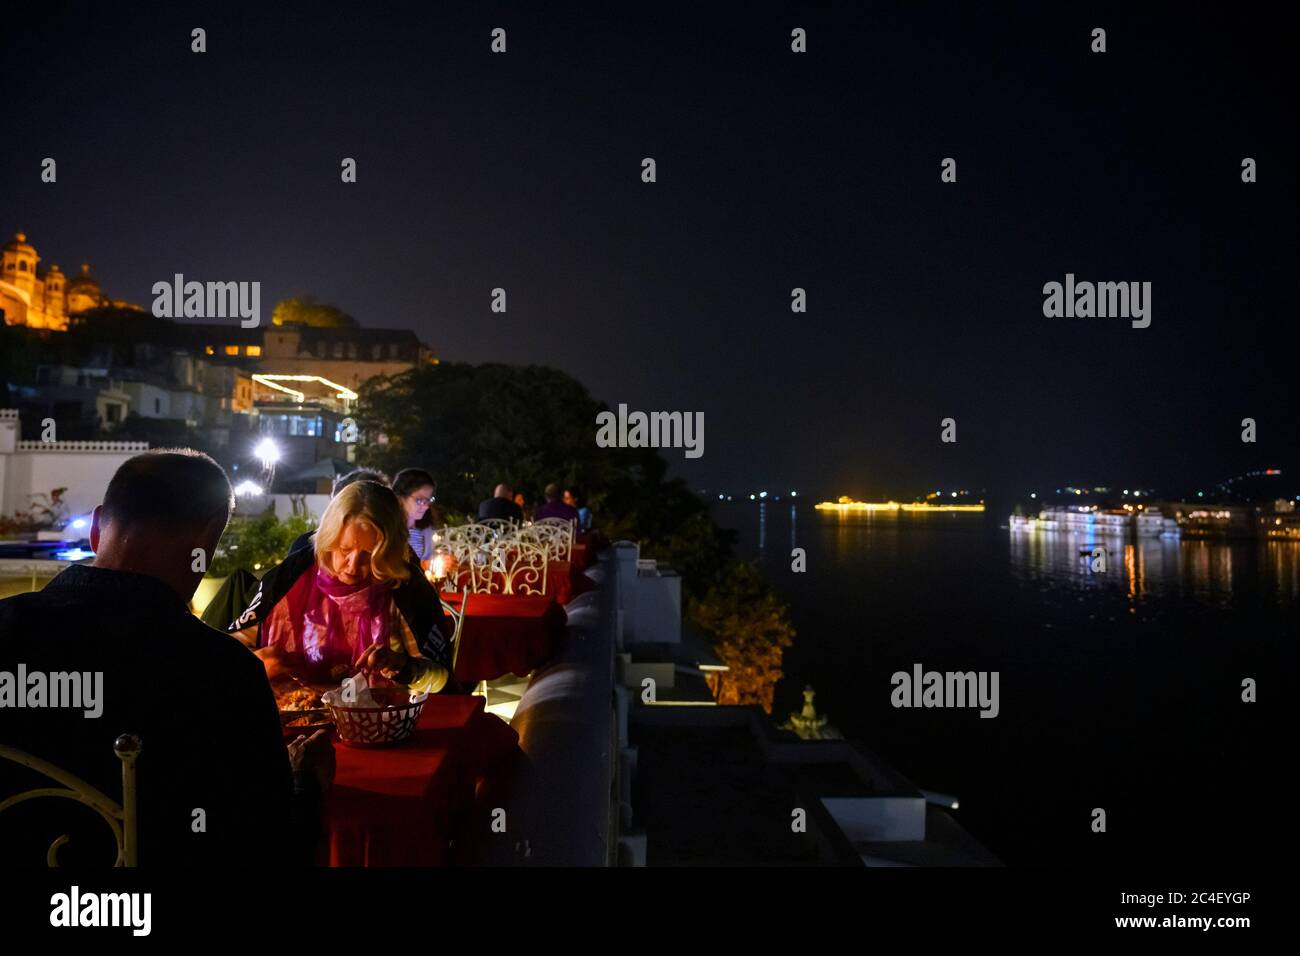 Restaurant terrace at night in the Jagat Niwas Palace Hotel with a view over Lake Pichola, Old City, Udaipur, Rajasthan, India Stock Photo